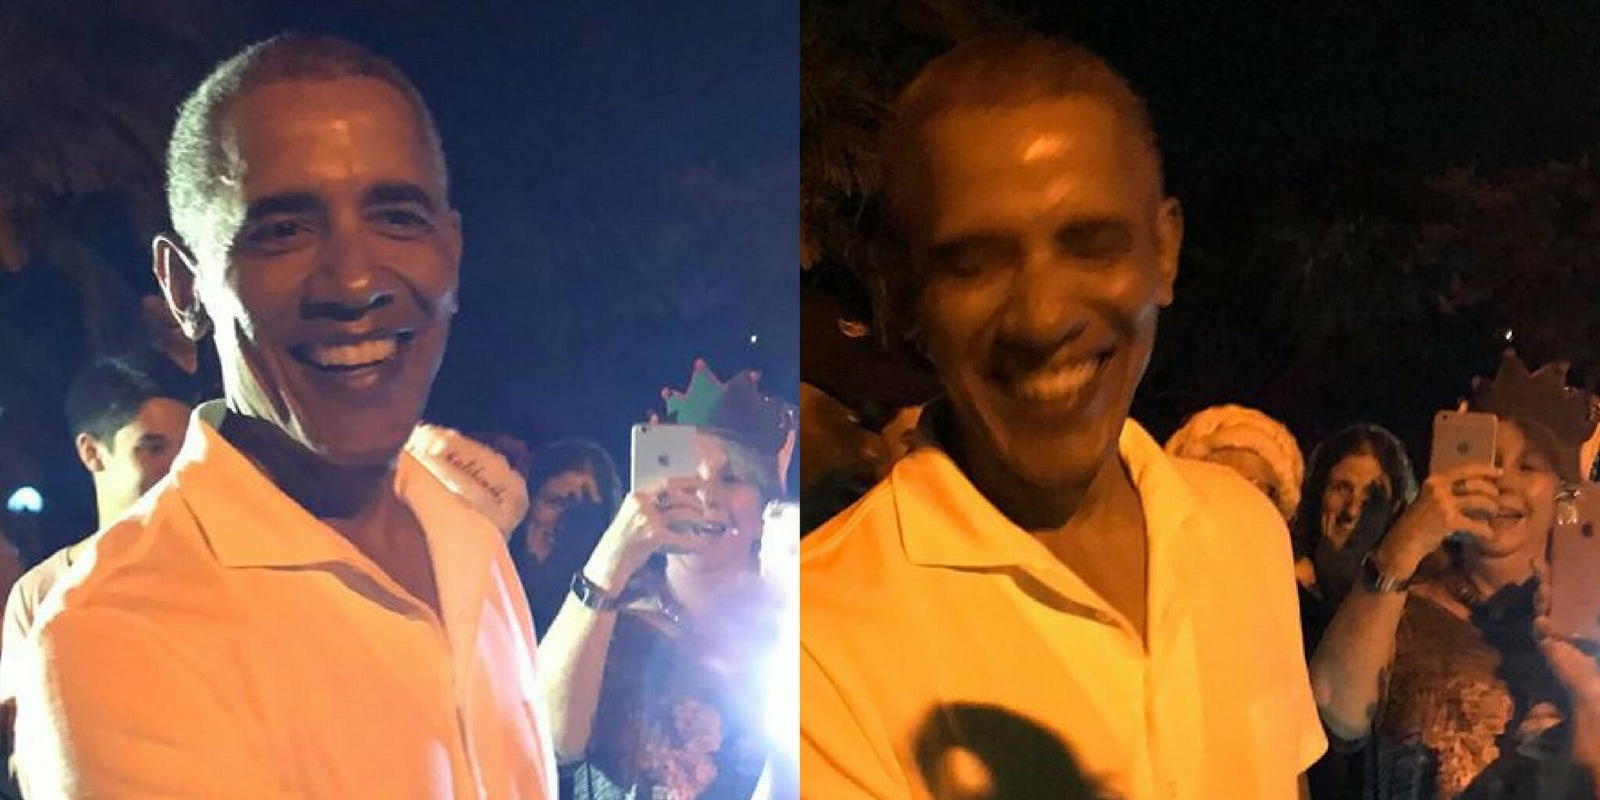 Former President Barack Obama meeting with Christmas carolers in Hawaii